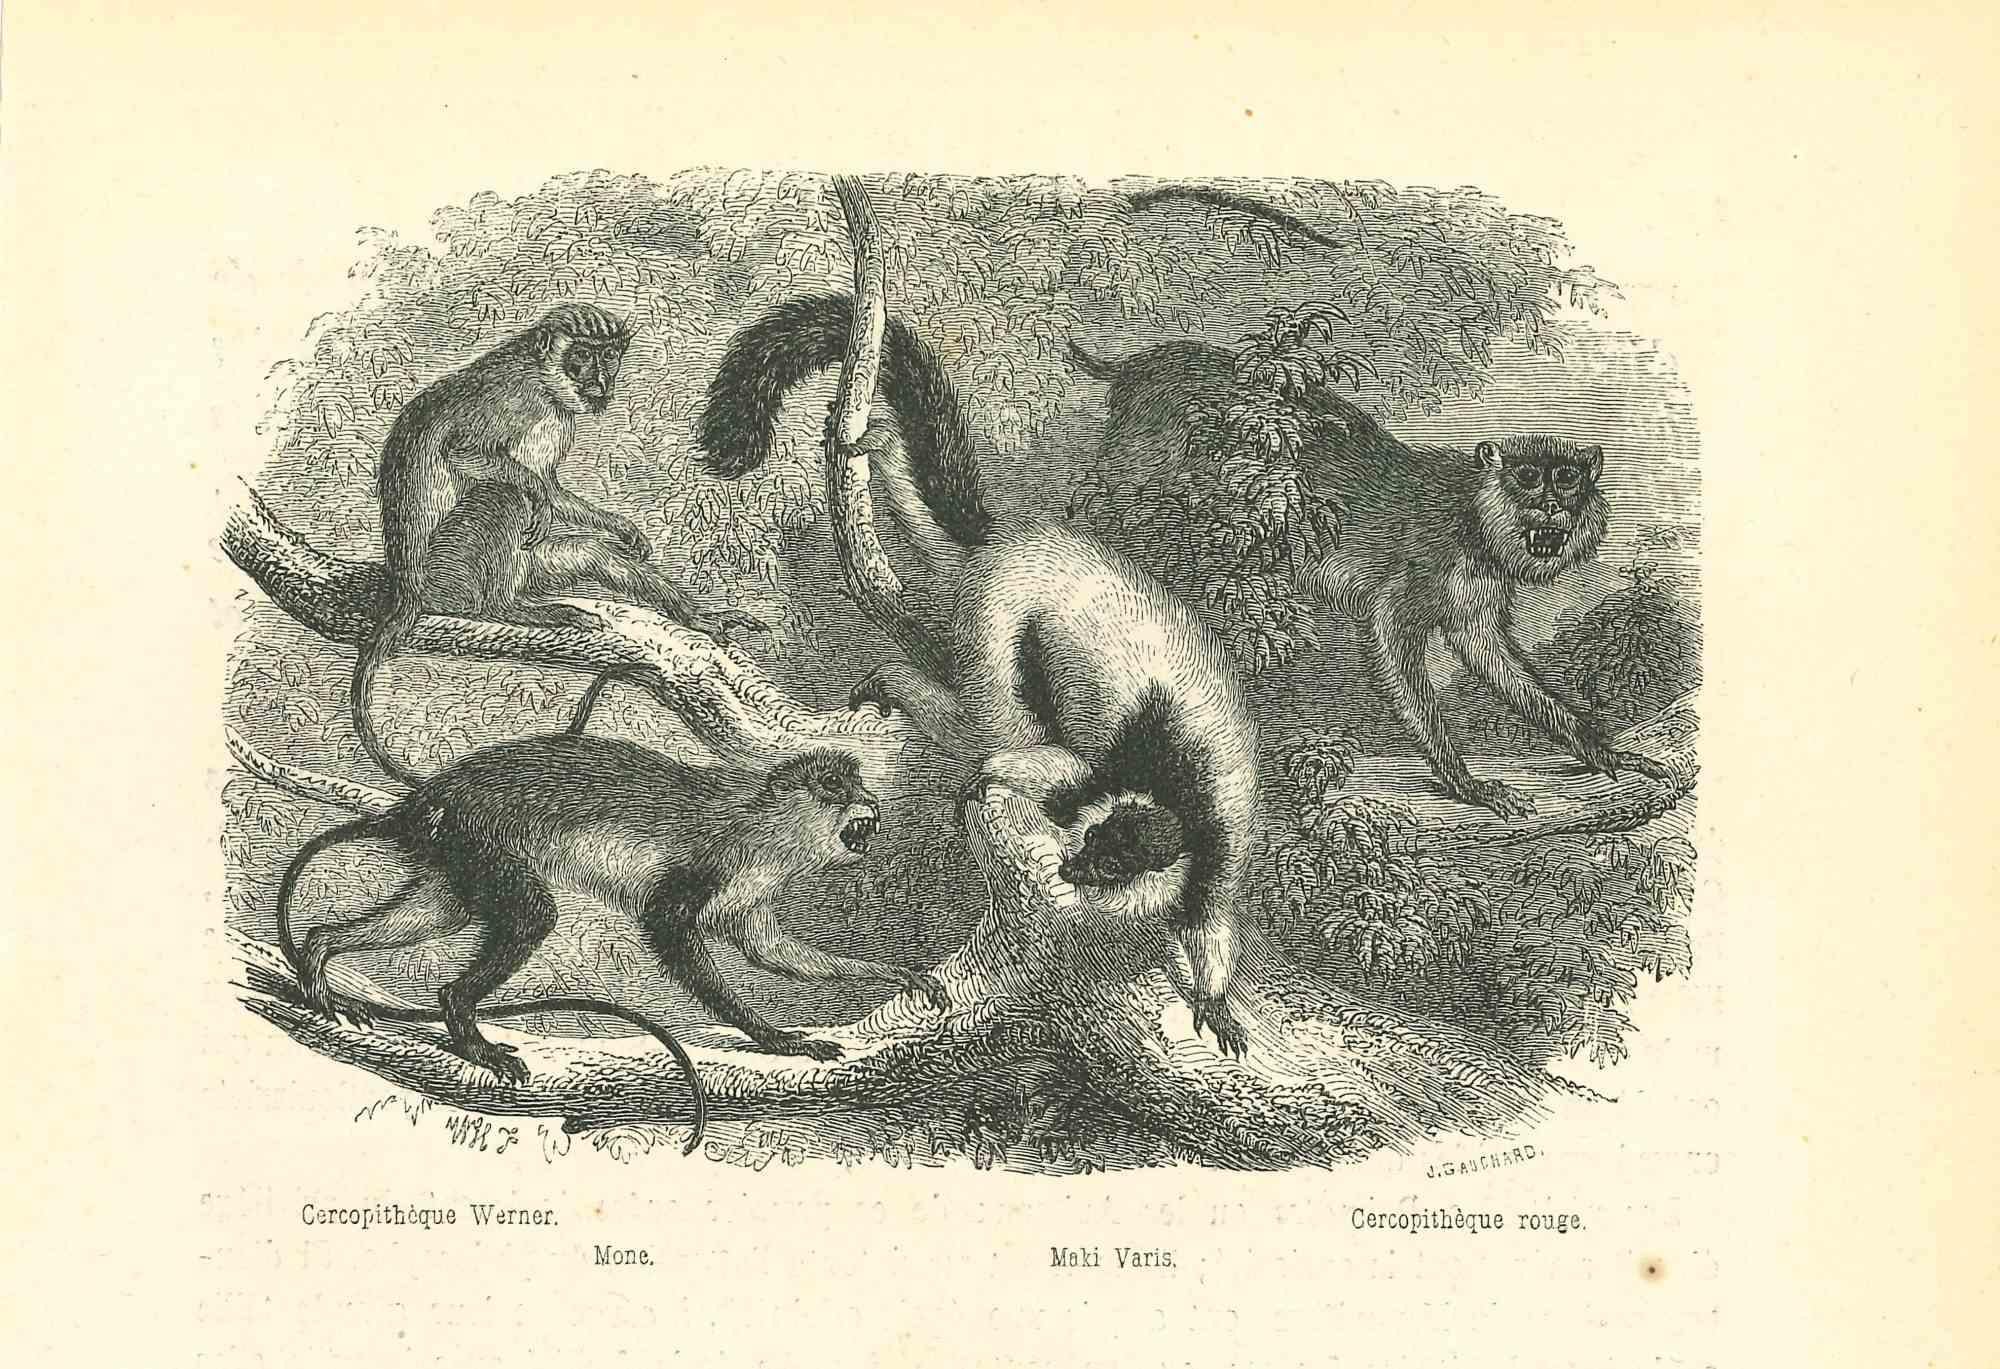 The Monkeys is an original lithograph on ivory-colored paper, realized by Paul Gervais (1816-1879). The artwork is from the series of "Les Trois Règnes de la Nature", and was published in 1854.

Good conditions. Titled on the lower with notes on the